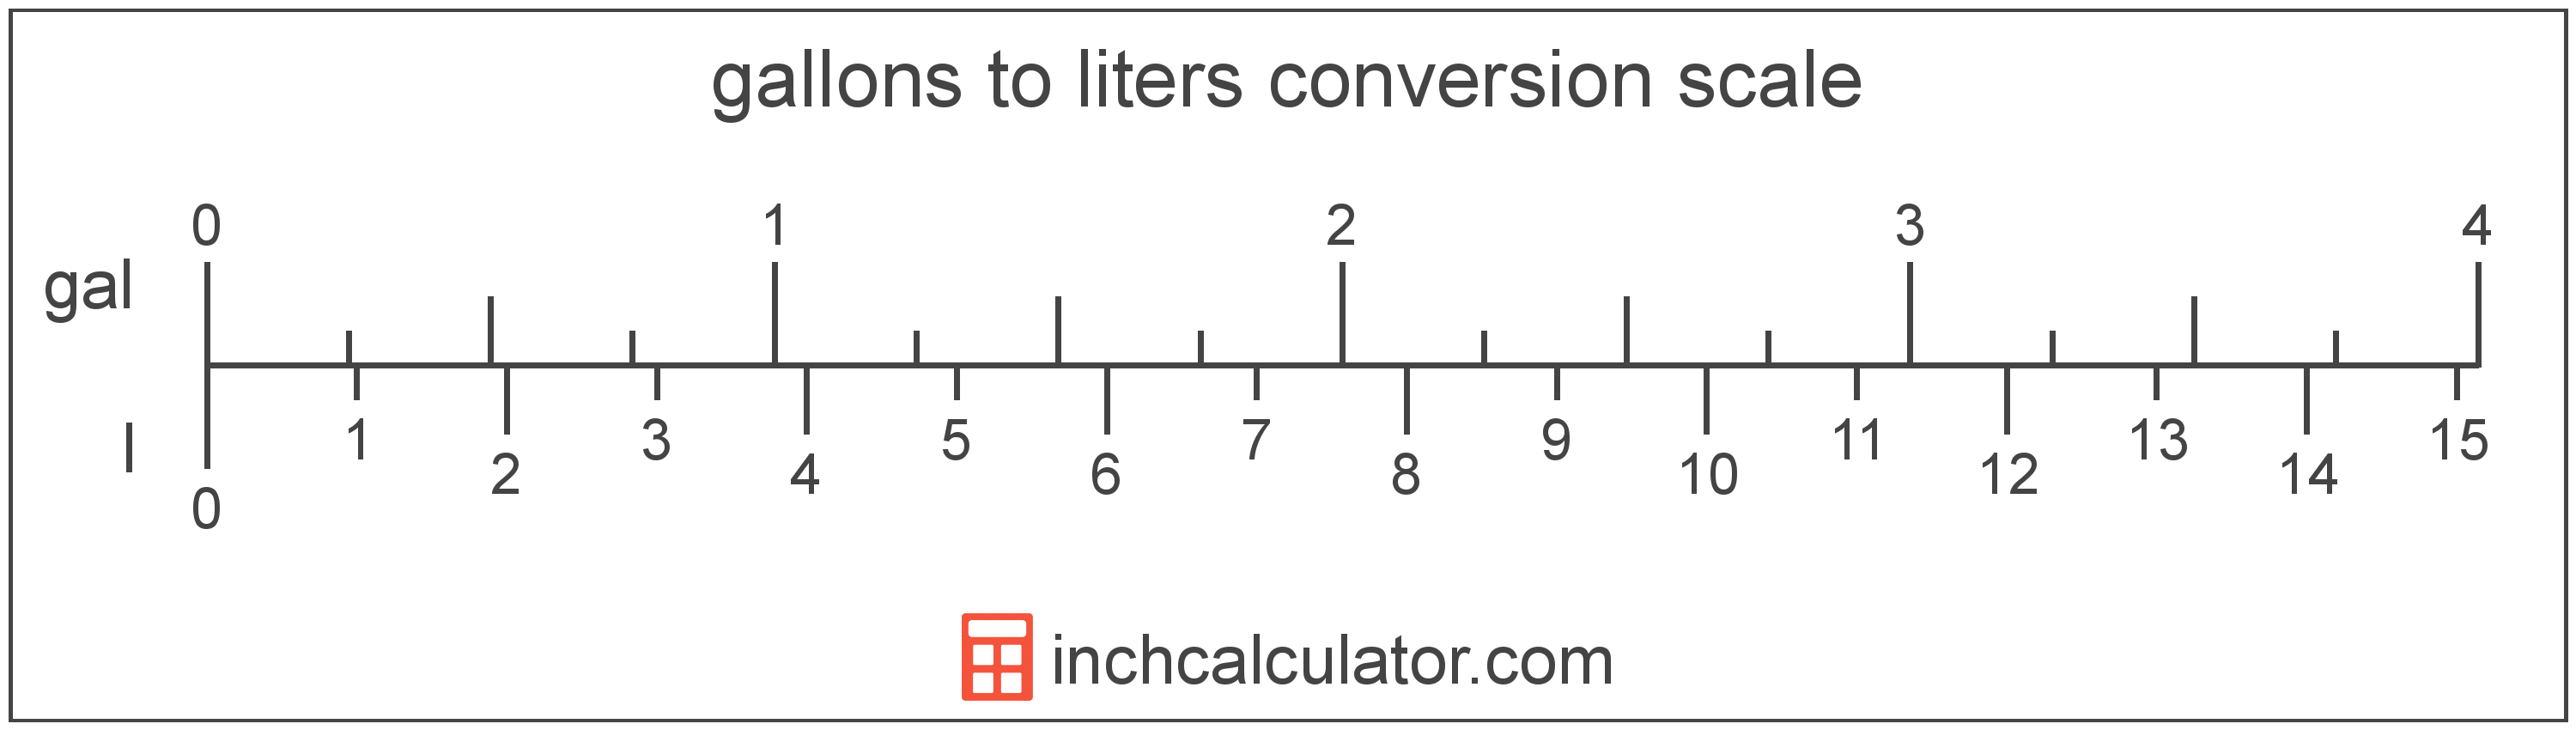 conversion scale showing liters and equivalent gallons volume values